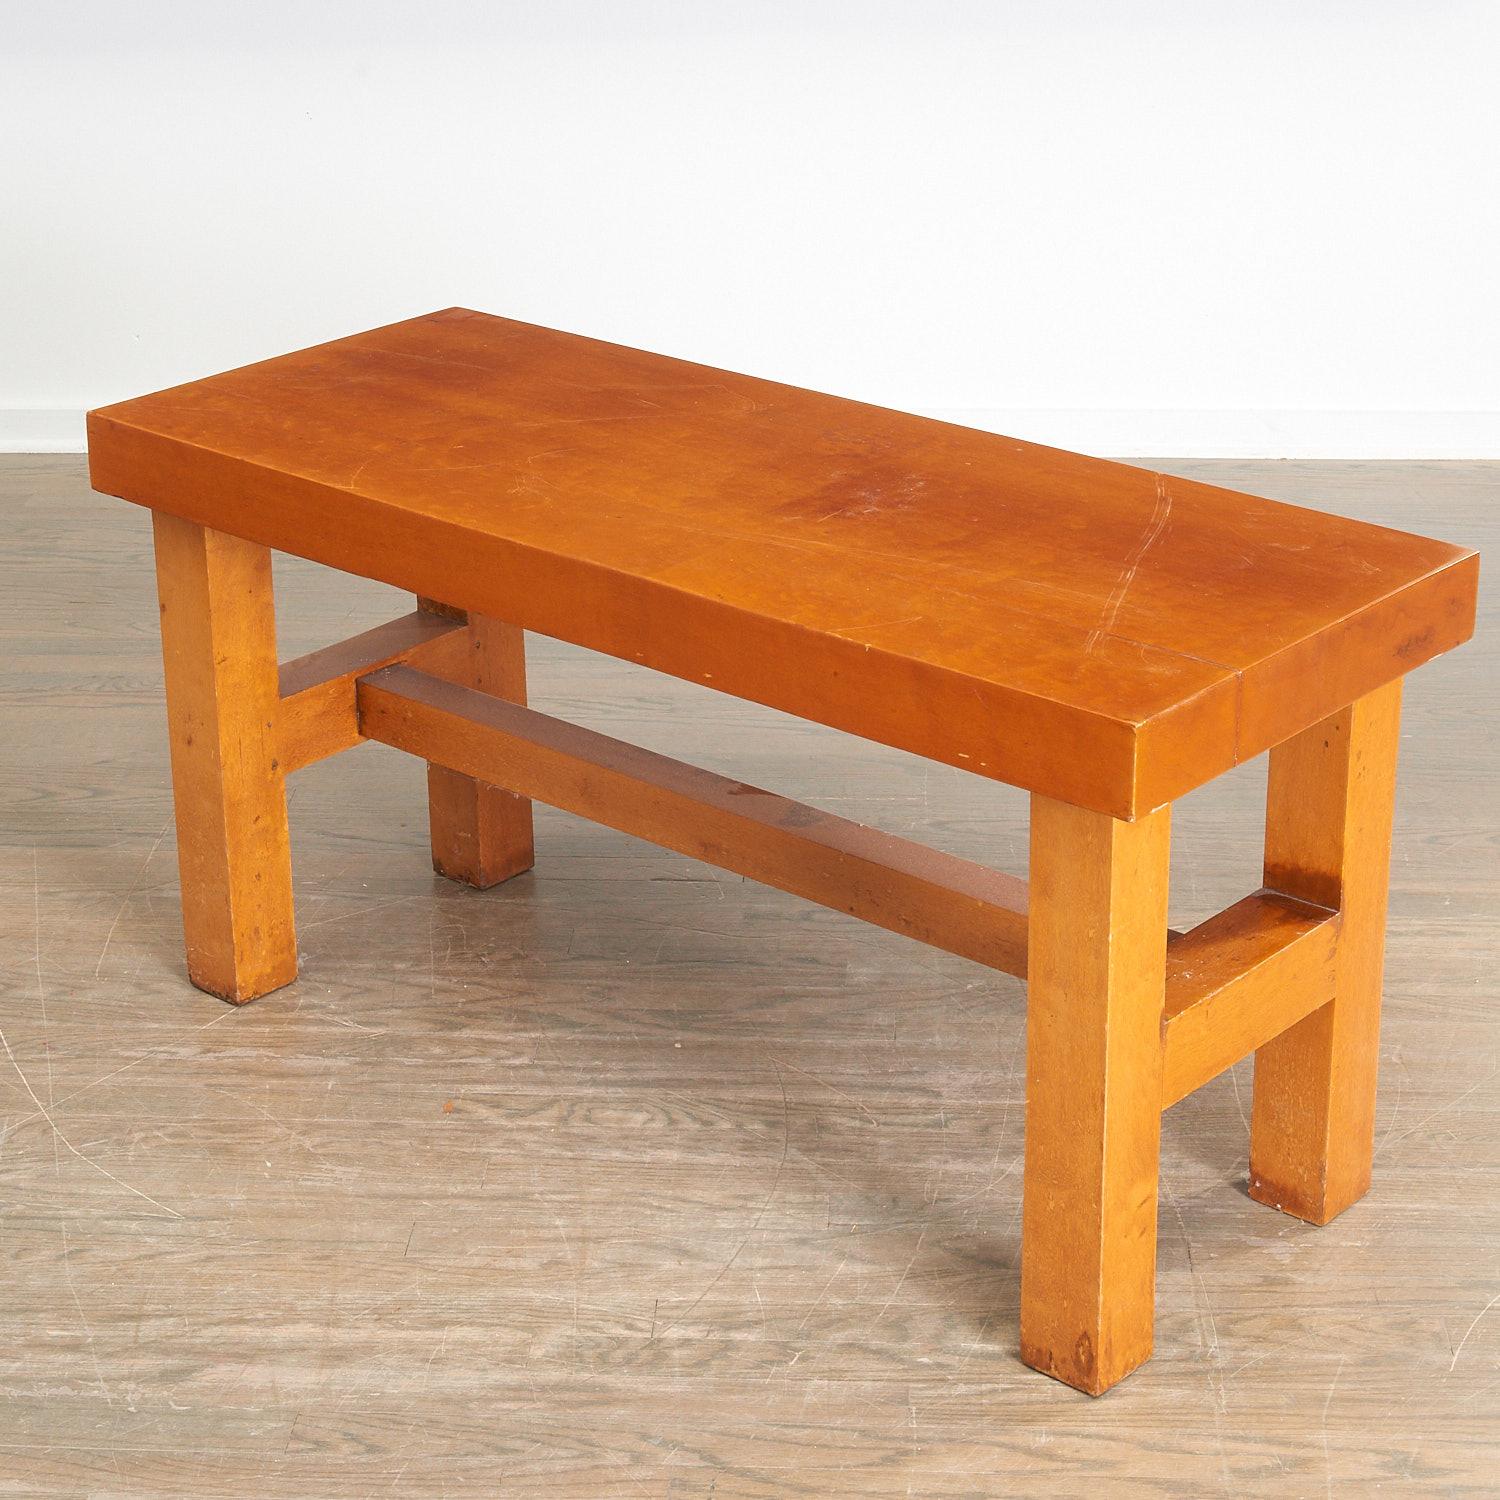 A substantial solid wood coffee table, c. 1940/50s, in the manner of Charlotte Perriand's Les Arcs ski resort décor. A heavy wood (likely elm) slab top on block legs joined by stretchers, unmarked.

Dimensions:
23.5